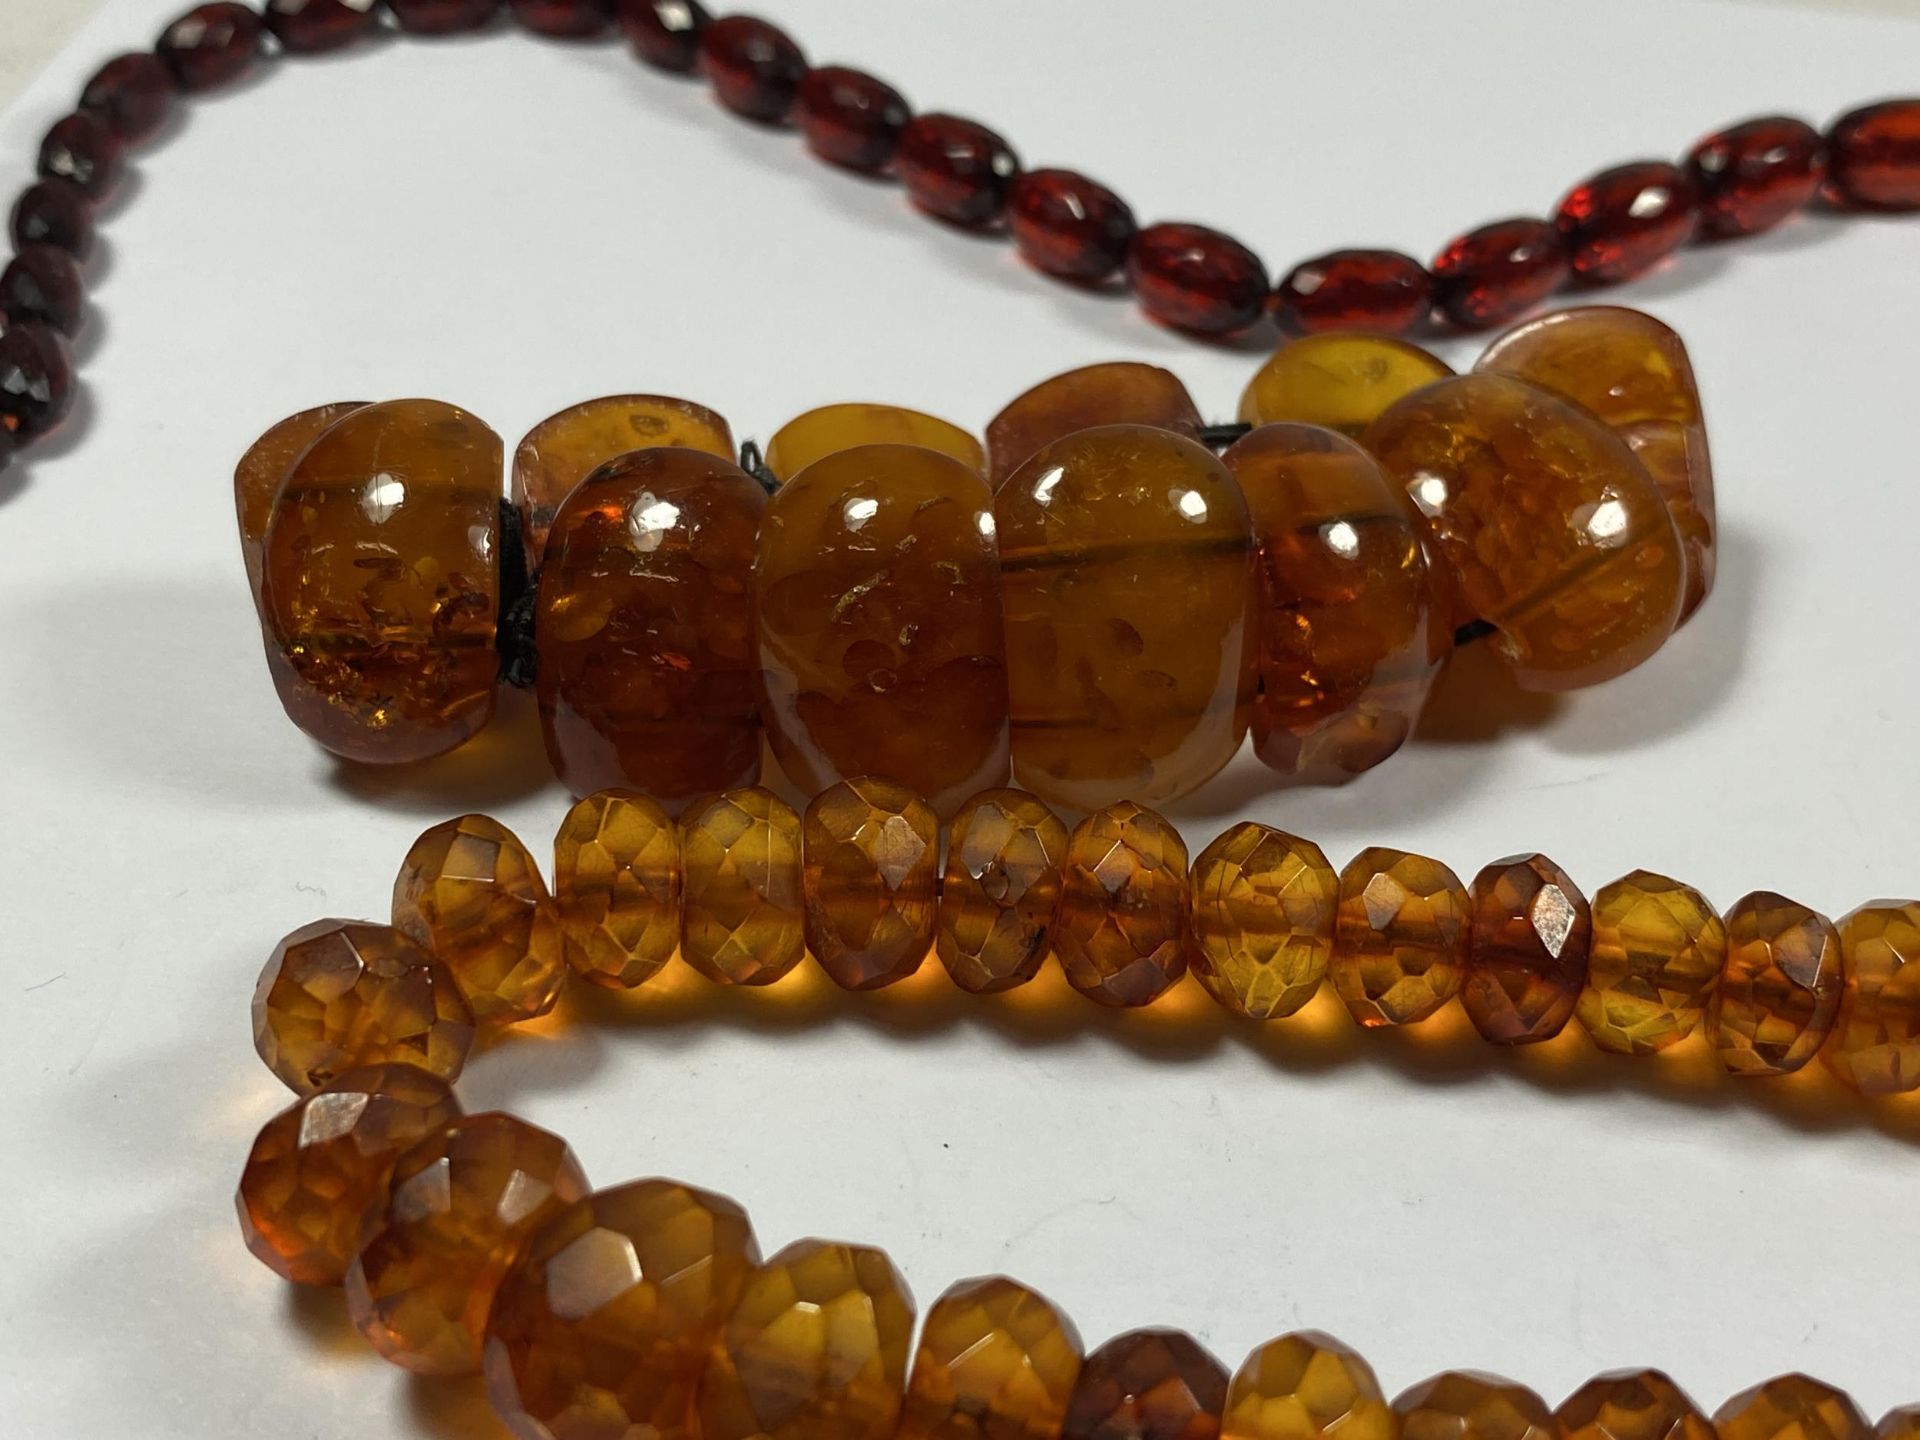 THREE BEADED ITEMS - RED GLASS NECKLACE, AMBER EFFECT BRACELET AND NECKLACE - Image 3 of 5